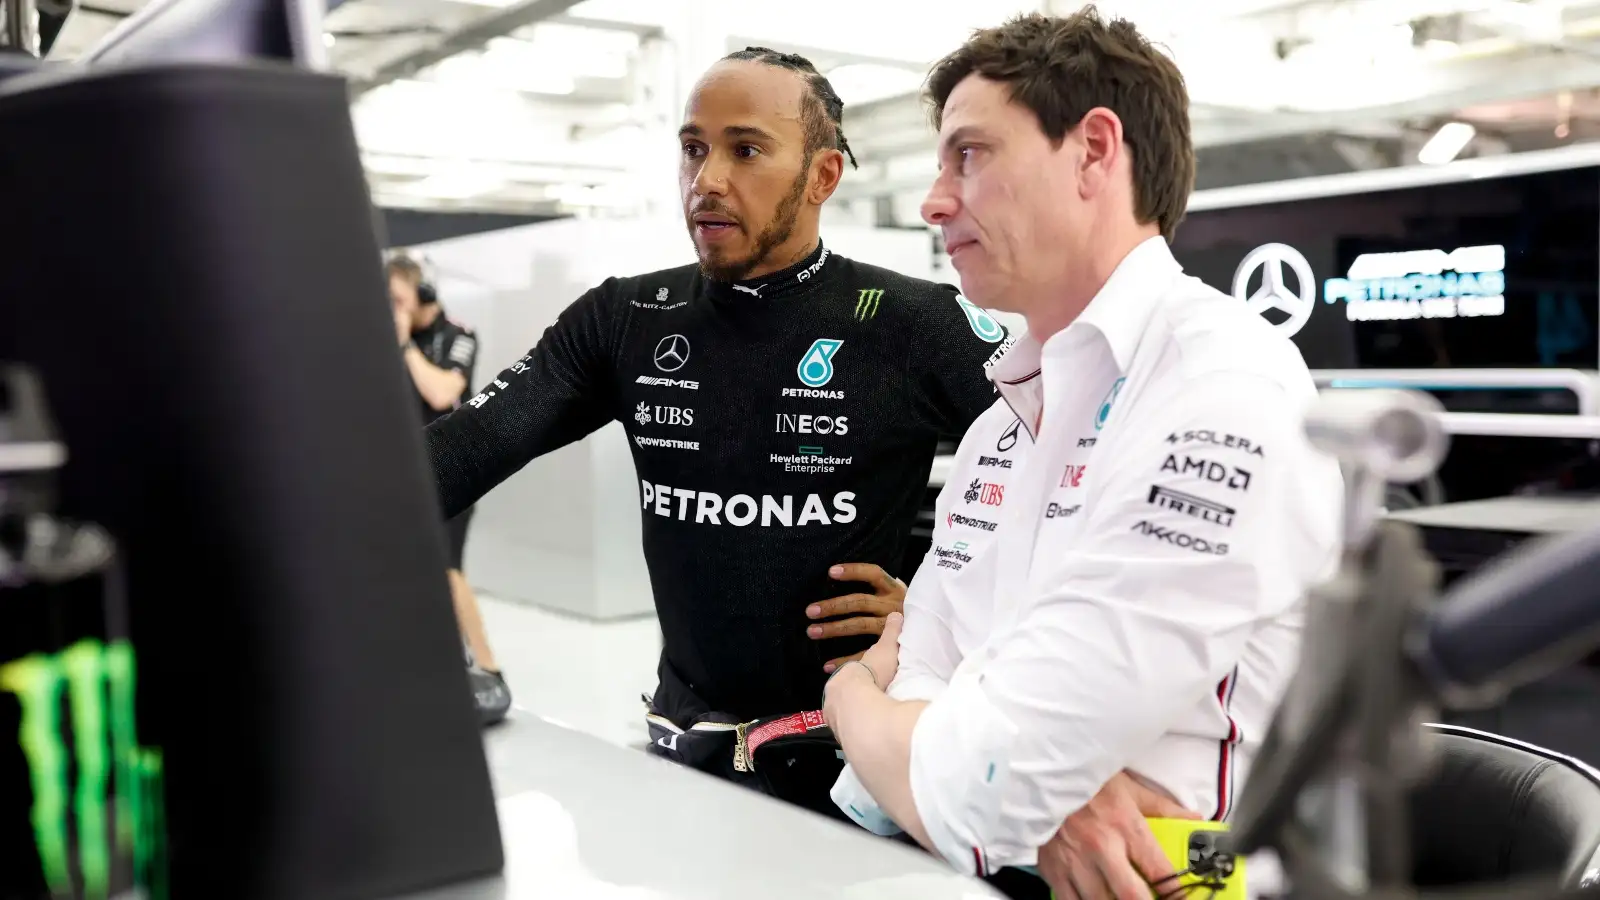 Mercedes driver Lewis Hamilton speaking with Toto Wolff.